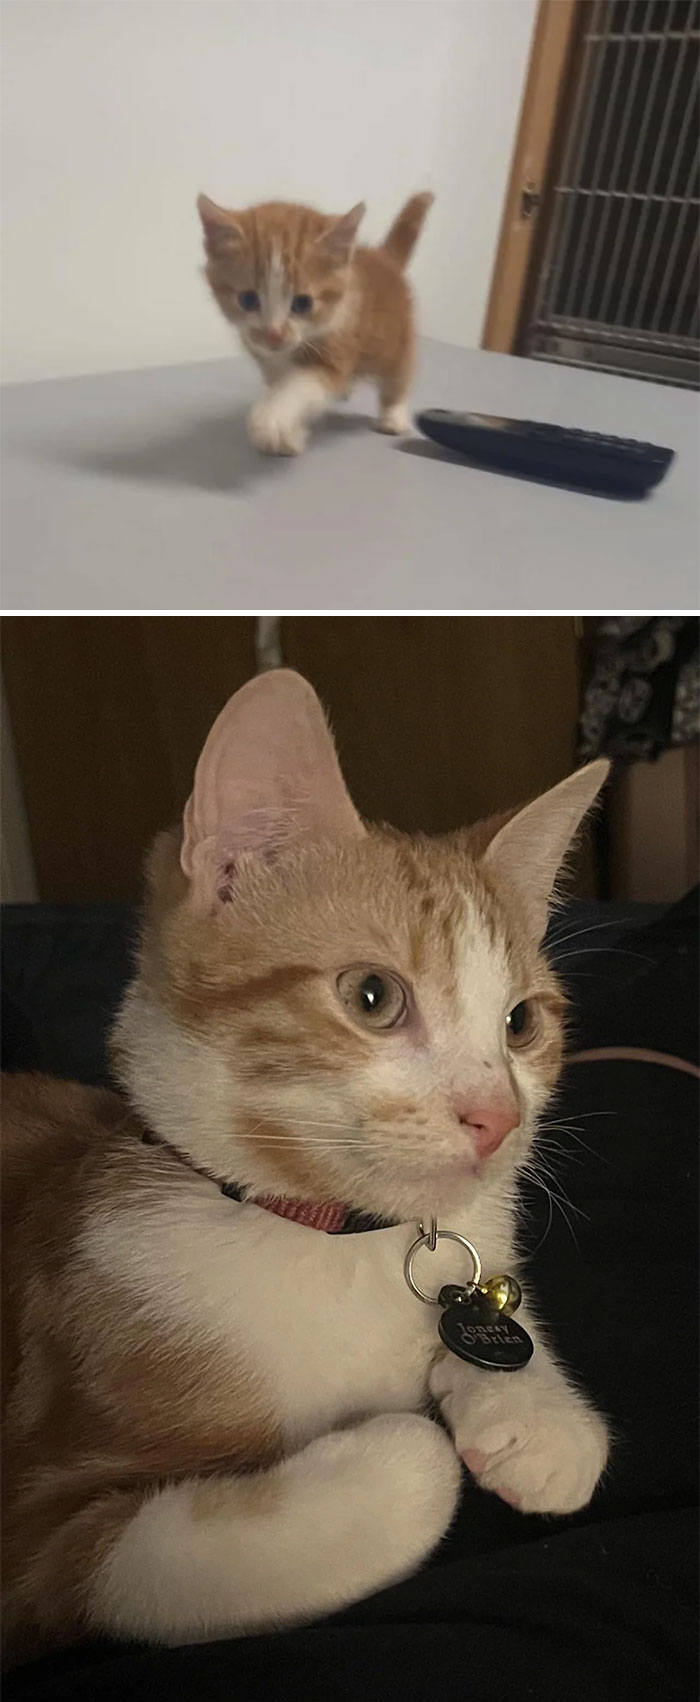 This Is Jonesy. He Had Been Thrown Into A Ditch. Here He Is Three Months Later